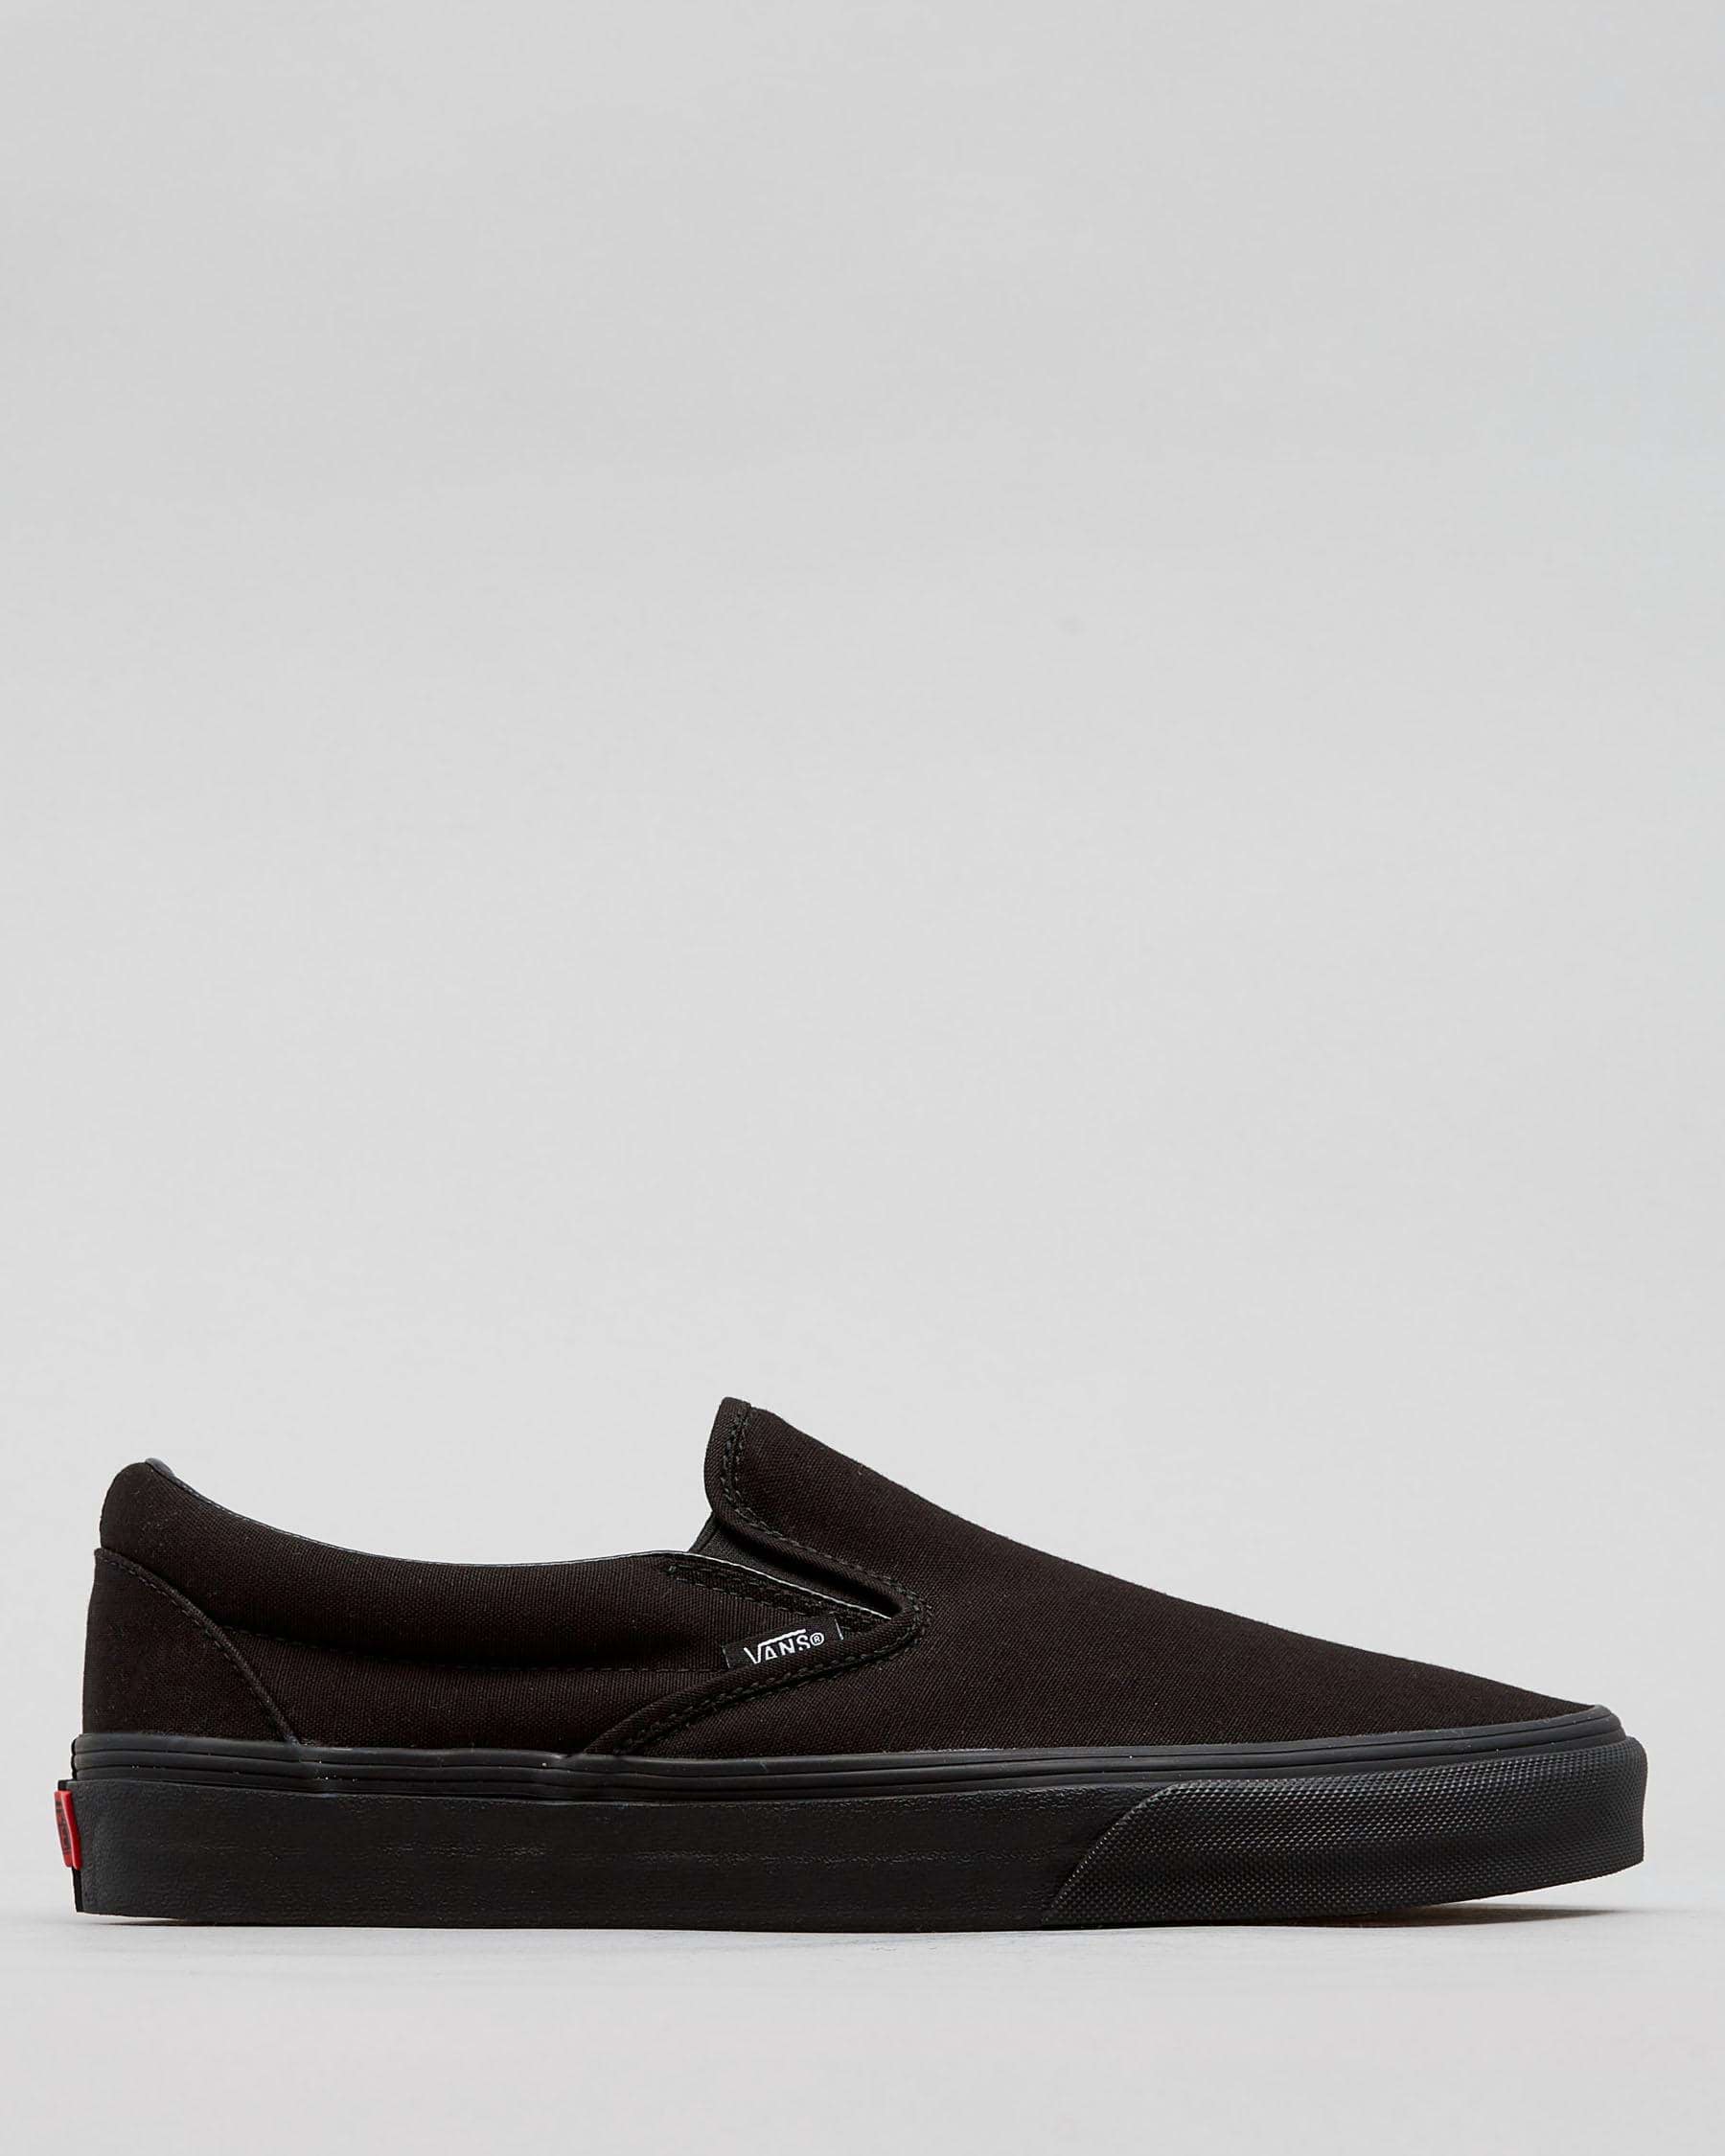 Vans Classic Slip-On Shoes In Black/black - Fast Shipping & Easy ...